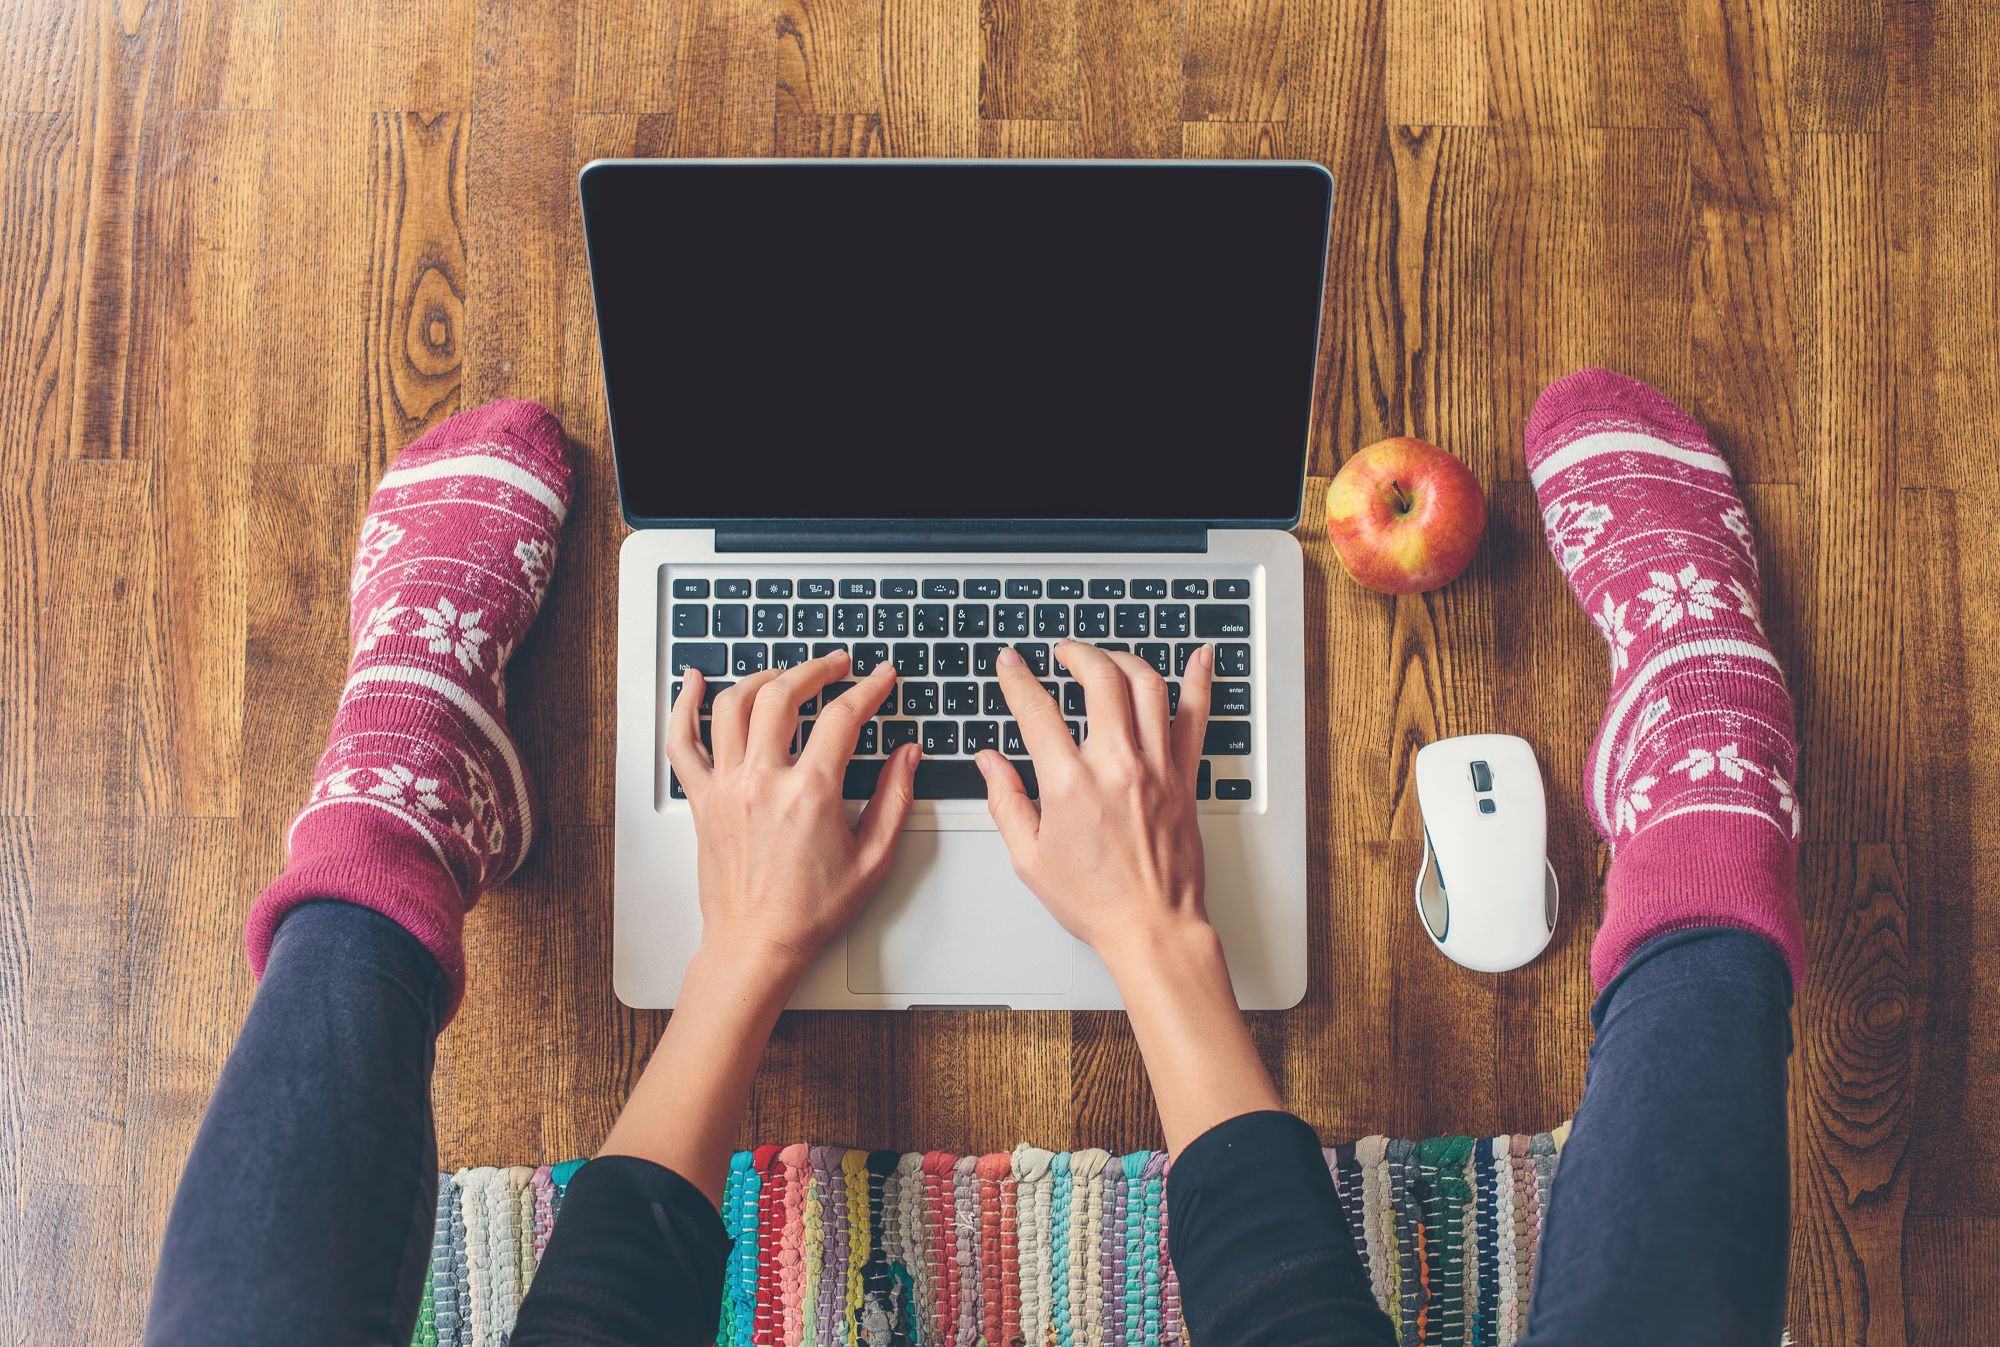 a photo showing someone working in pink socks with white pattern, on an open laptop, sitting on the floor - working on freelance jobs